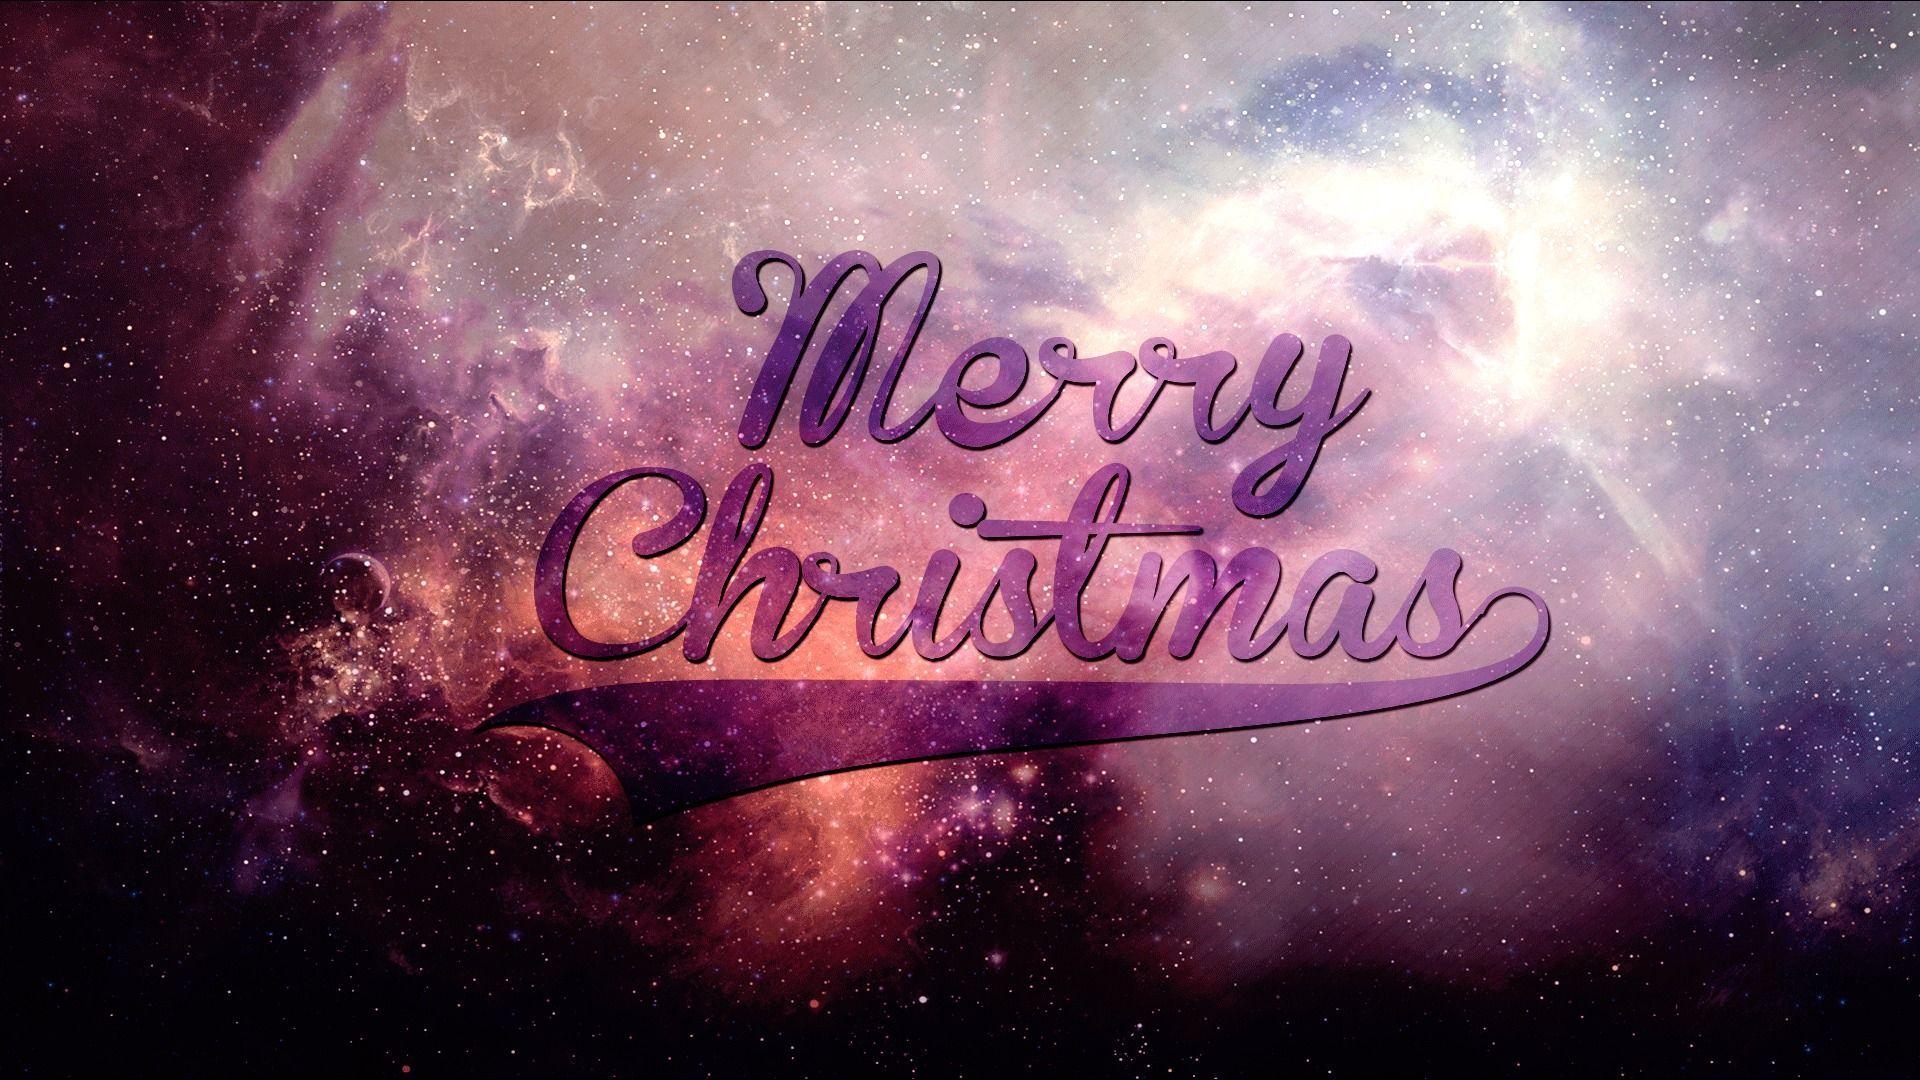 hd wallpaper picture merry christmas. Merry christmas